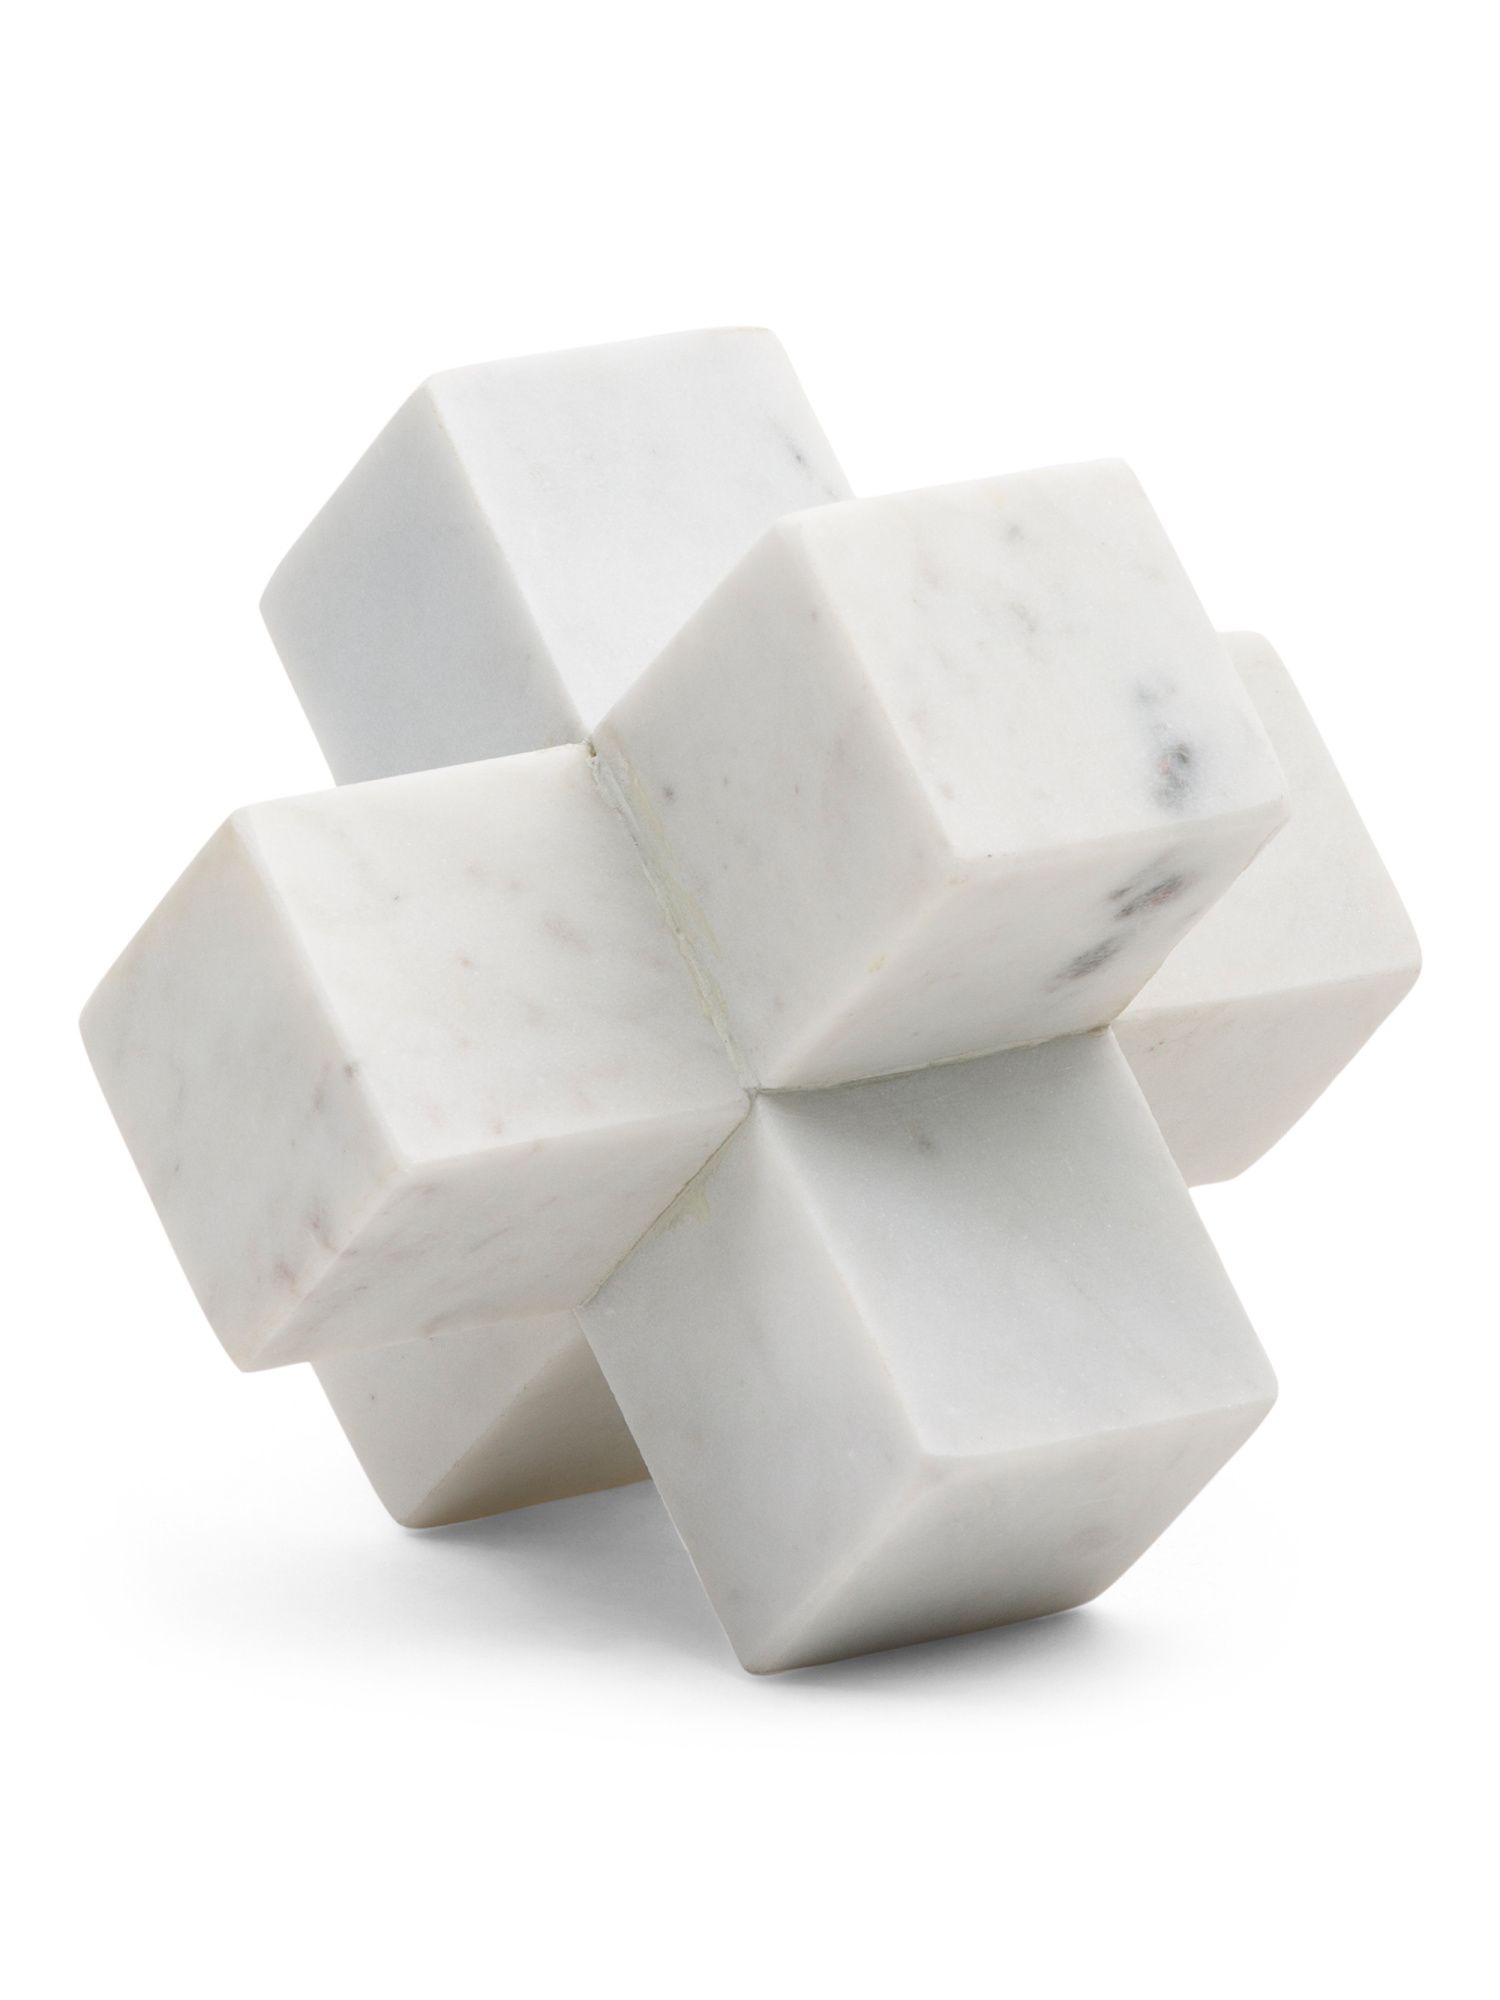 Made In India 6x6 Marble Jack | TJ Maxx